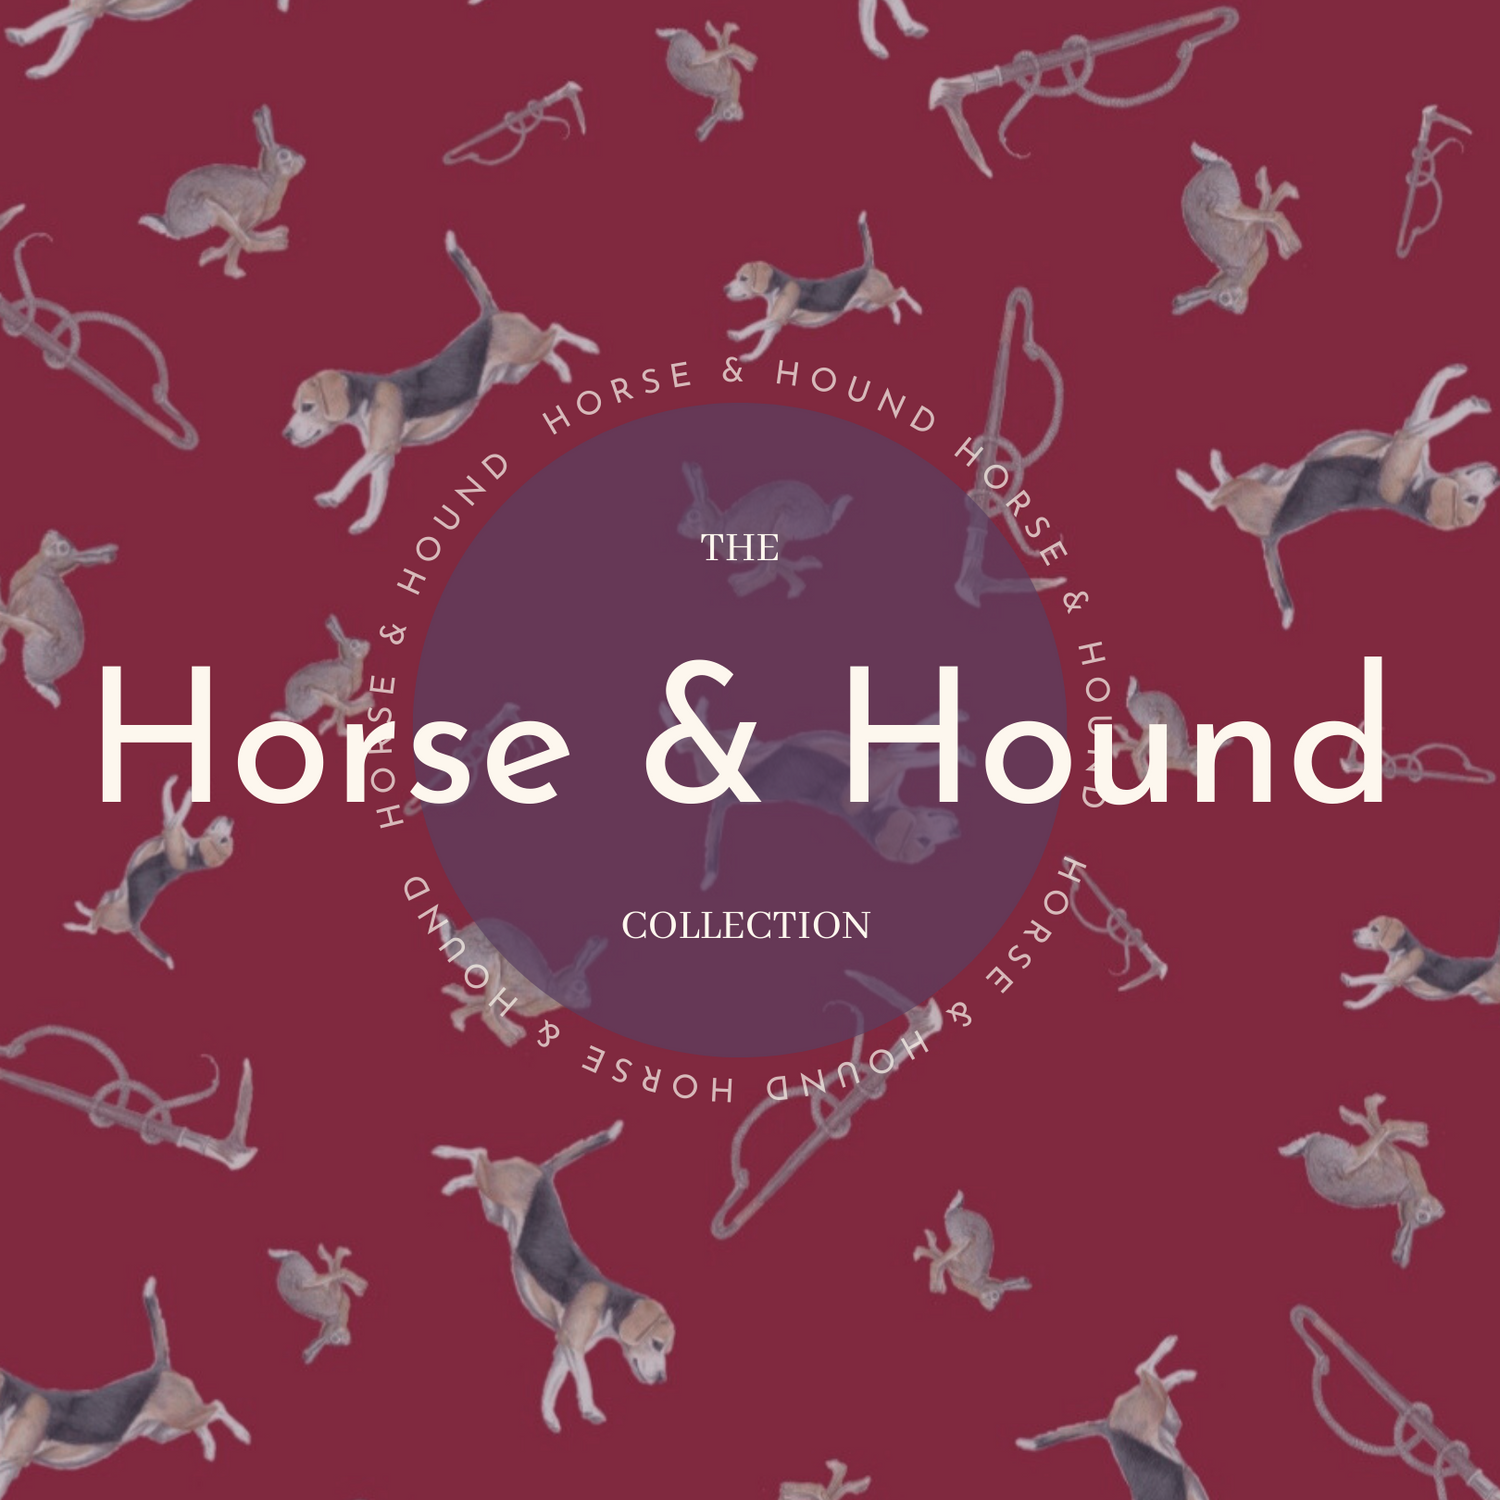 The Horse & Hound Collection